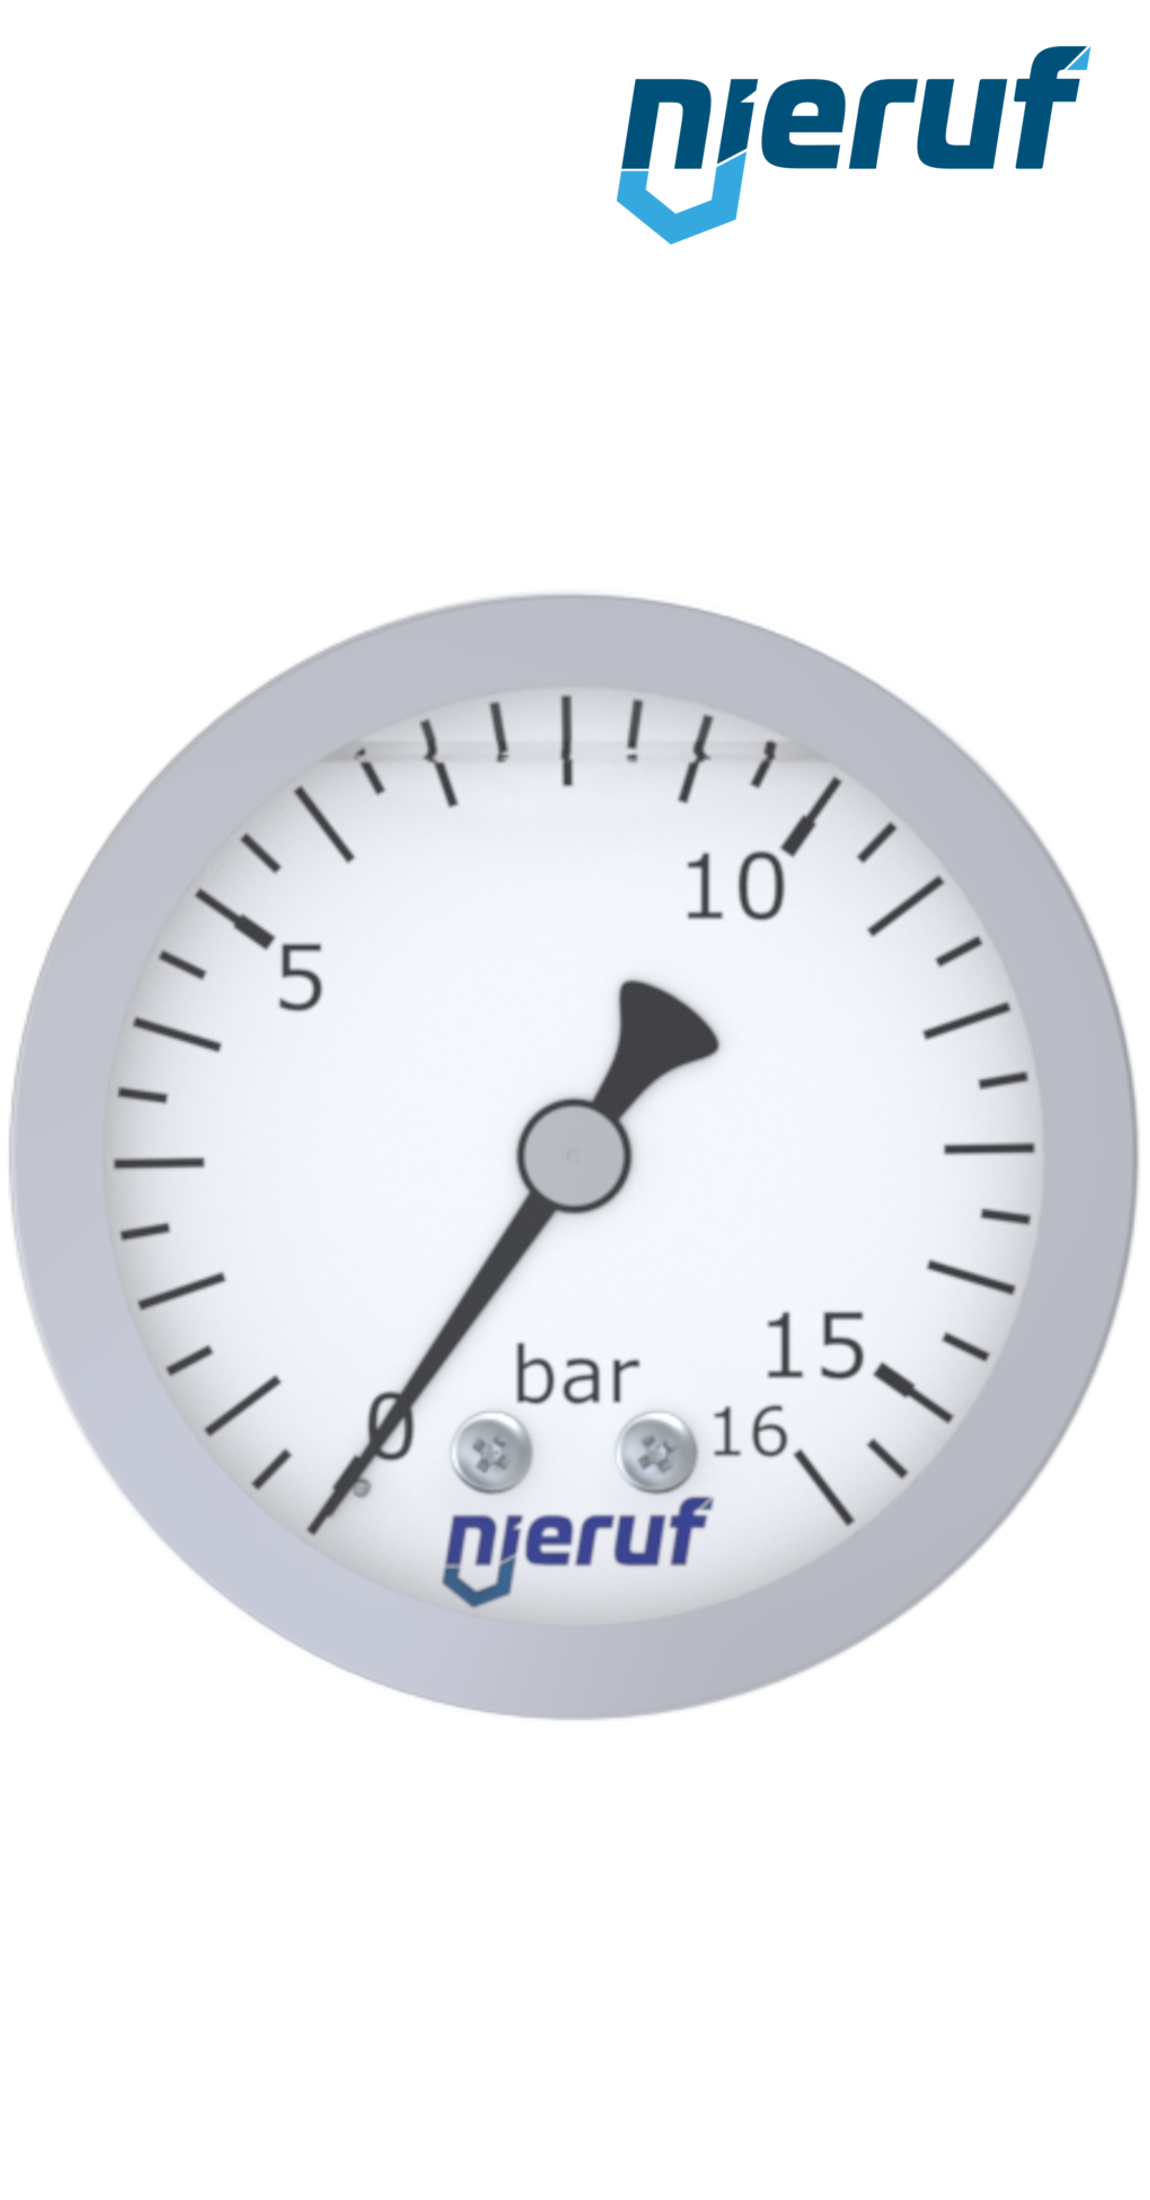 pressure gauge G 1/4" axial 63 mm stainless steel MM06 0 - 4,0 bar with glycerin filling